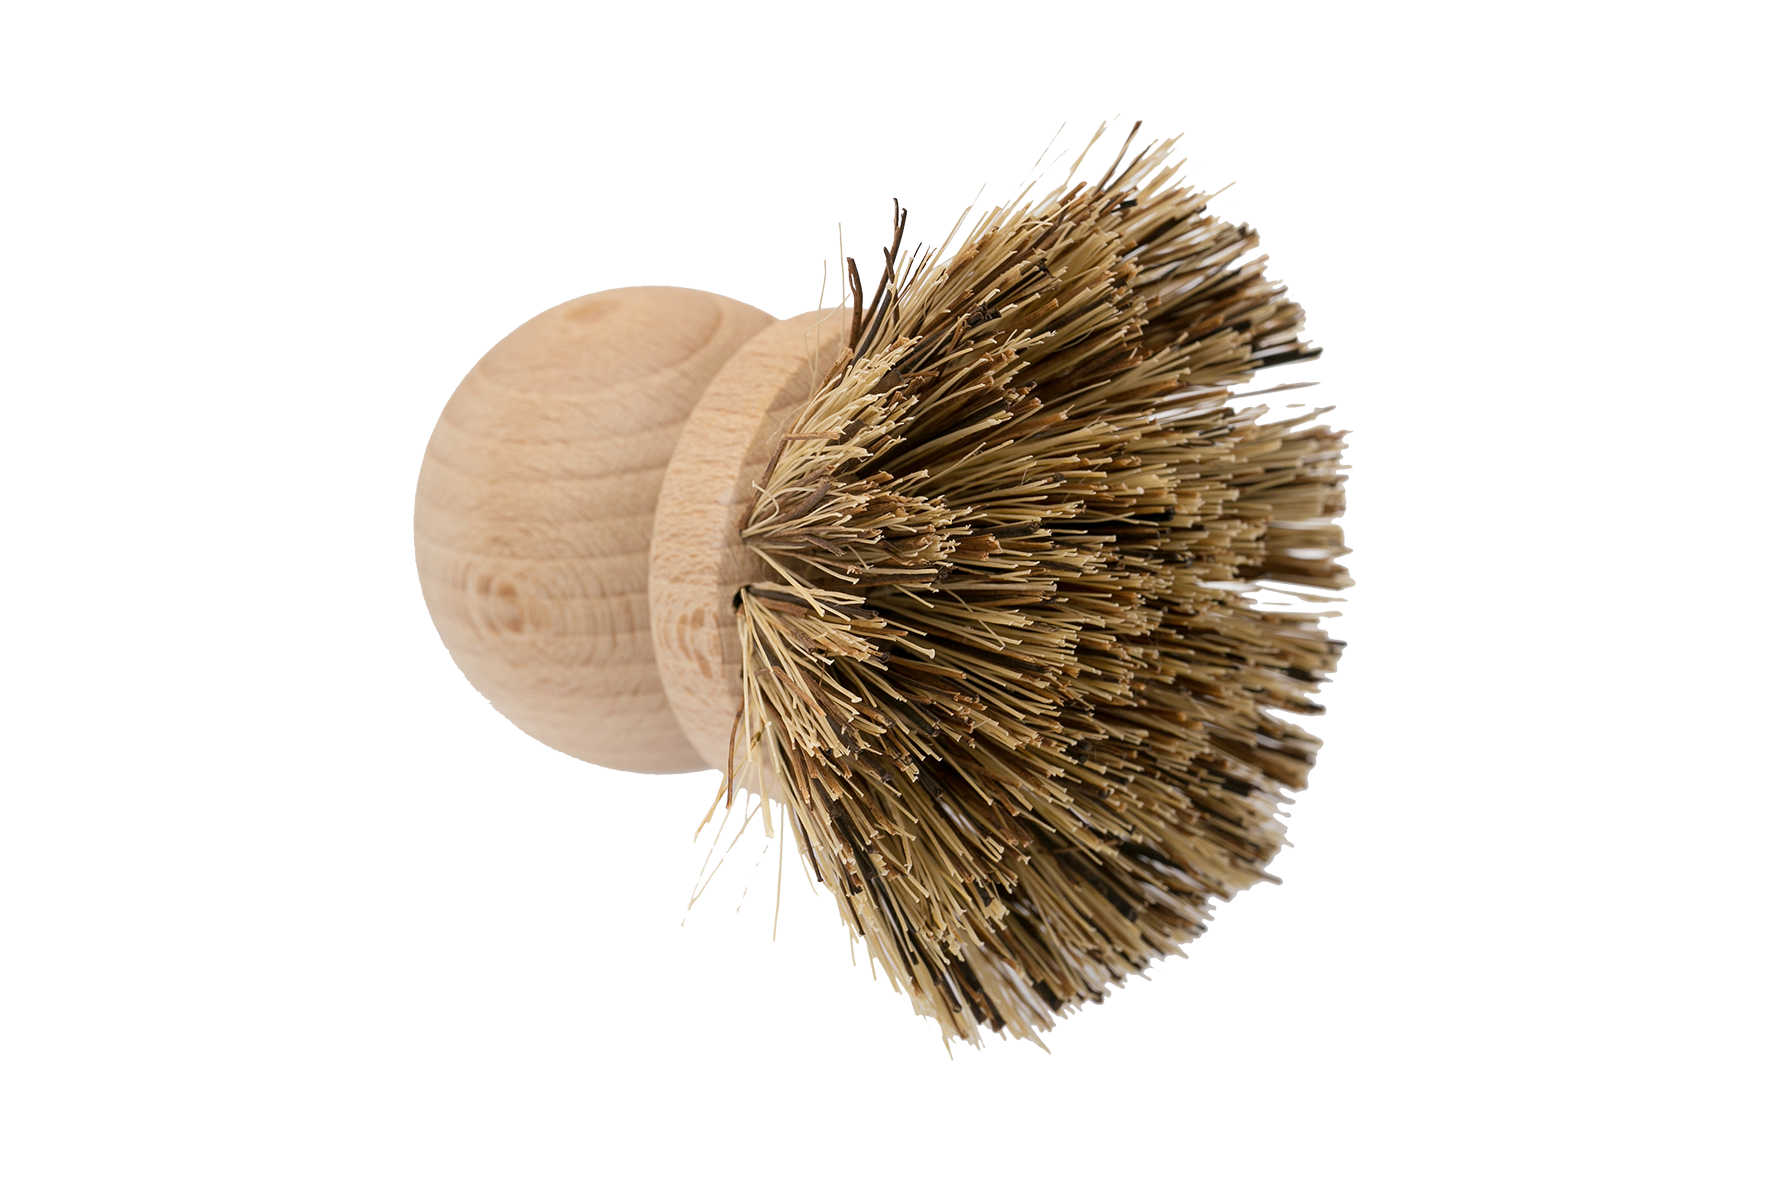 Andrée Jardin Tradition Saucepan Brushes in Display Box (Set of 10) Utilities Andrée Jardin Andrée Jardin Back in stock Brand_Andrée Jardin Home_Household Cleaning Kitchen_Accessories La Cuisine grande-brosse-a-casserolle-s1-1819